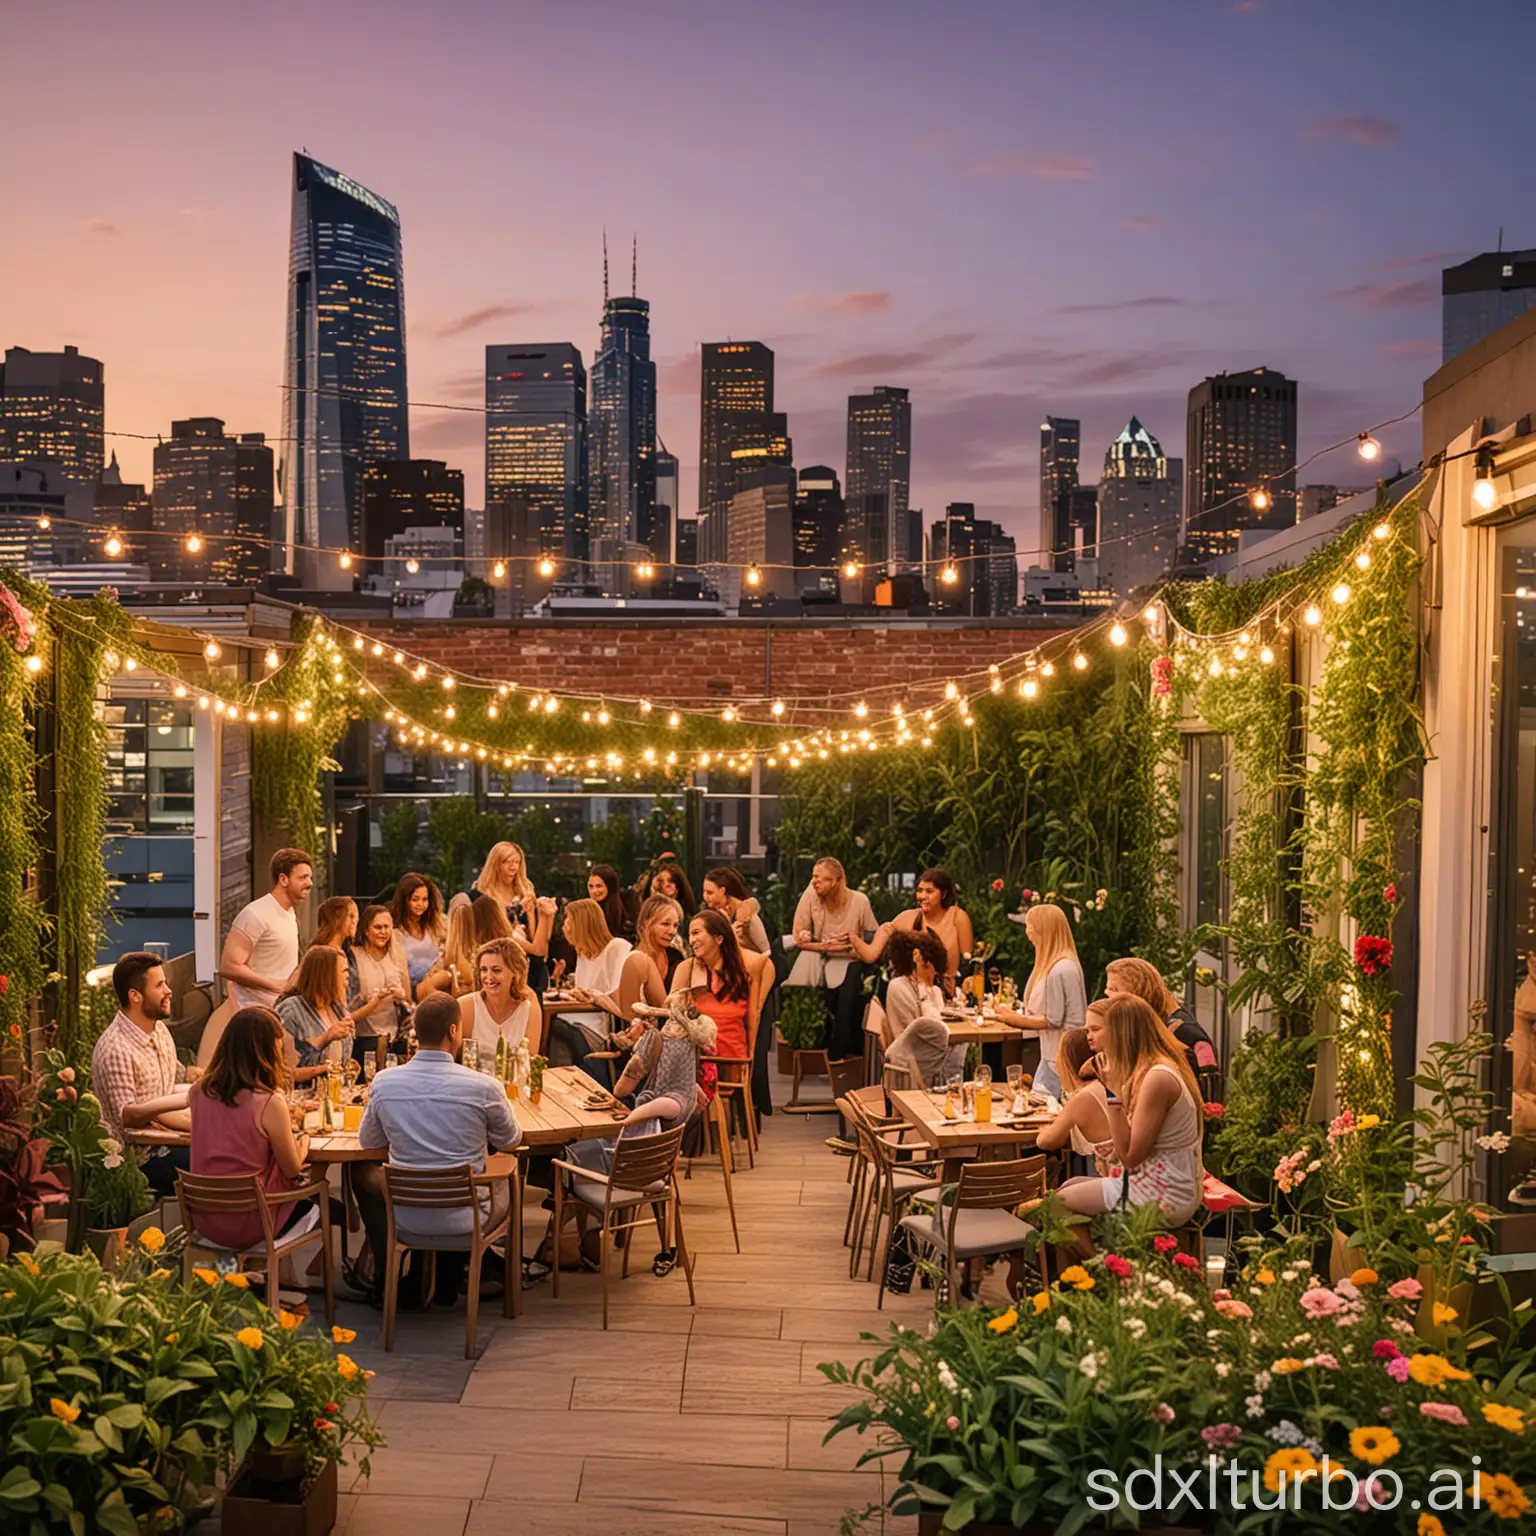 A vibrant rooftop garden party in a modern city. The garden is lush with green plants and colorful flowers, and string lights hang above. A diverse group of people, in summer casual wear, enjoy conversations over cocktails, with a city skyline in the background during sunset.